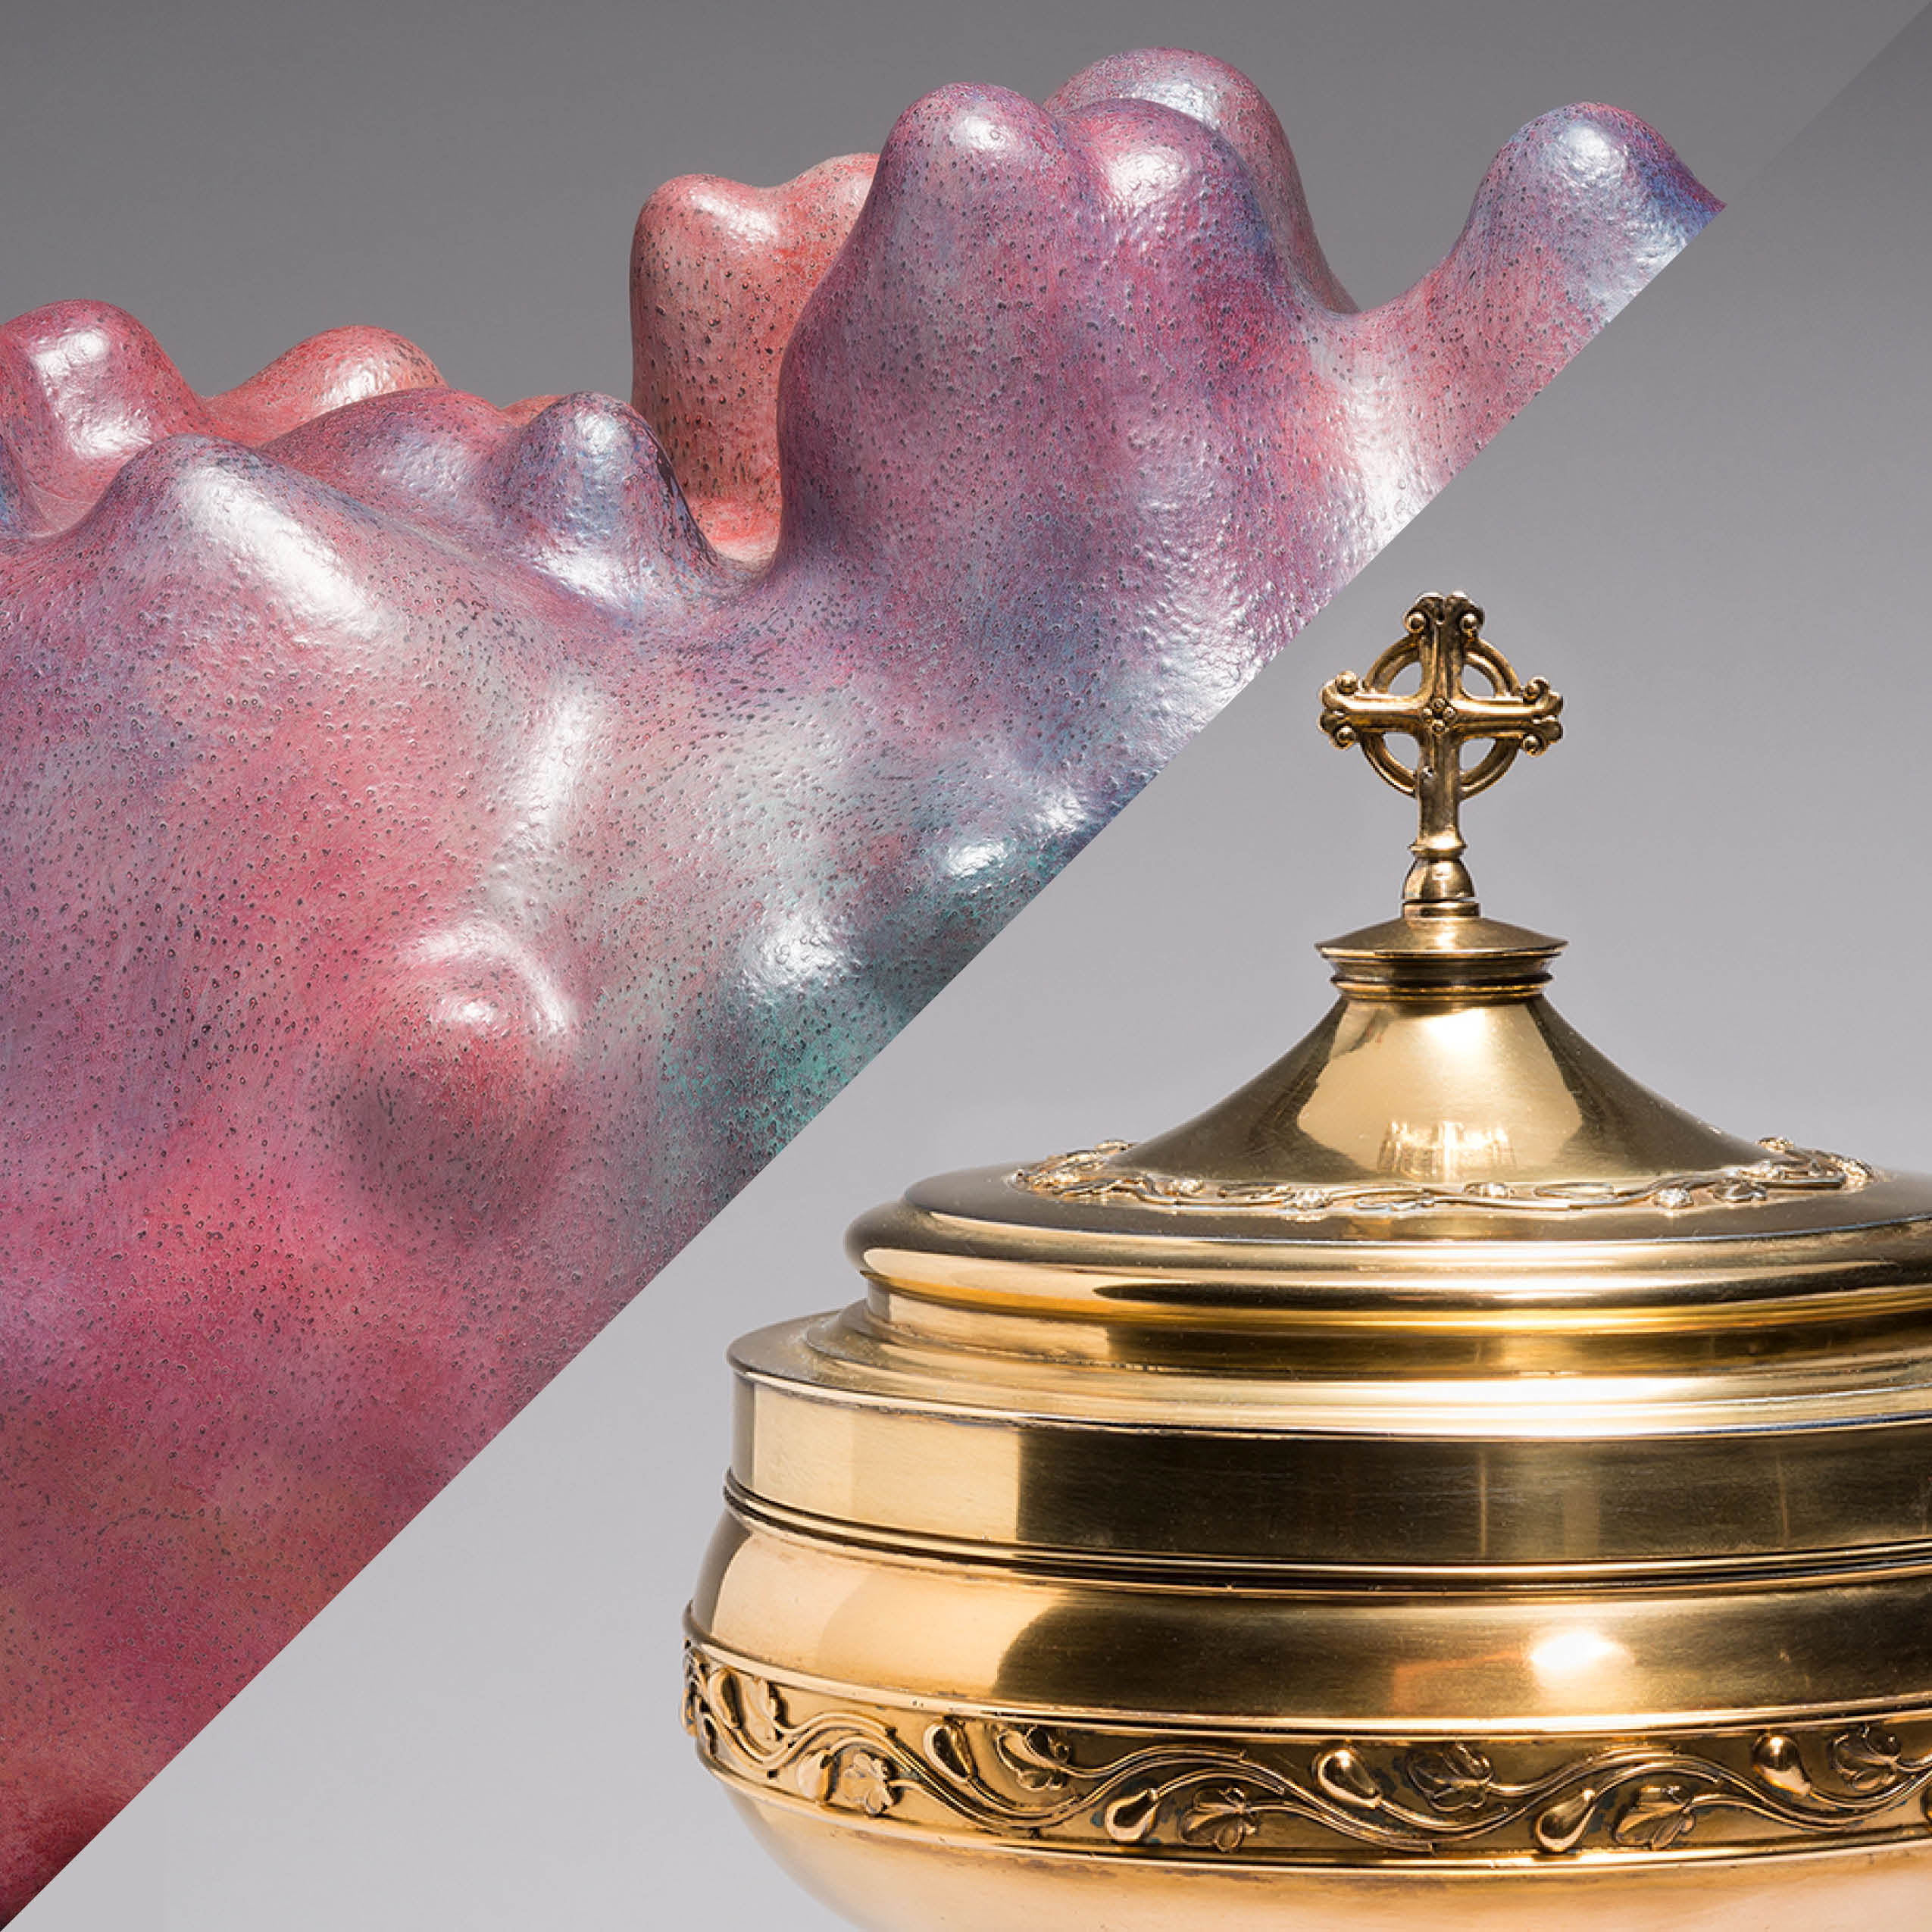 Image combining photographs of two artworks side by side: Ken Price's "The Squeeze" and Eugène Emmanuel Viollet-Le-Duc's "Ciborium"